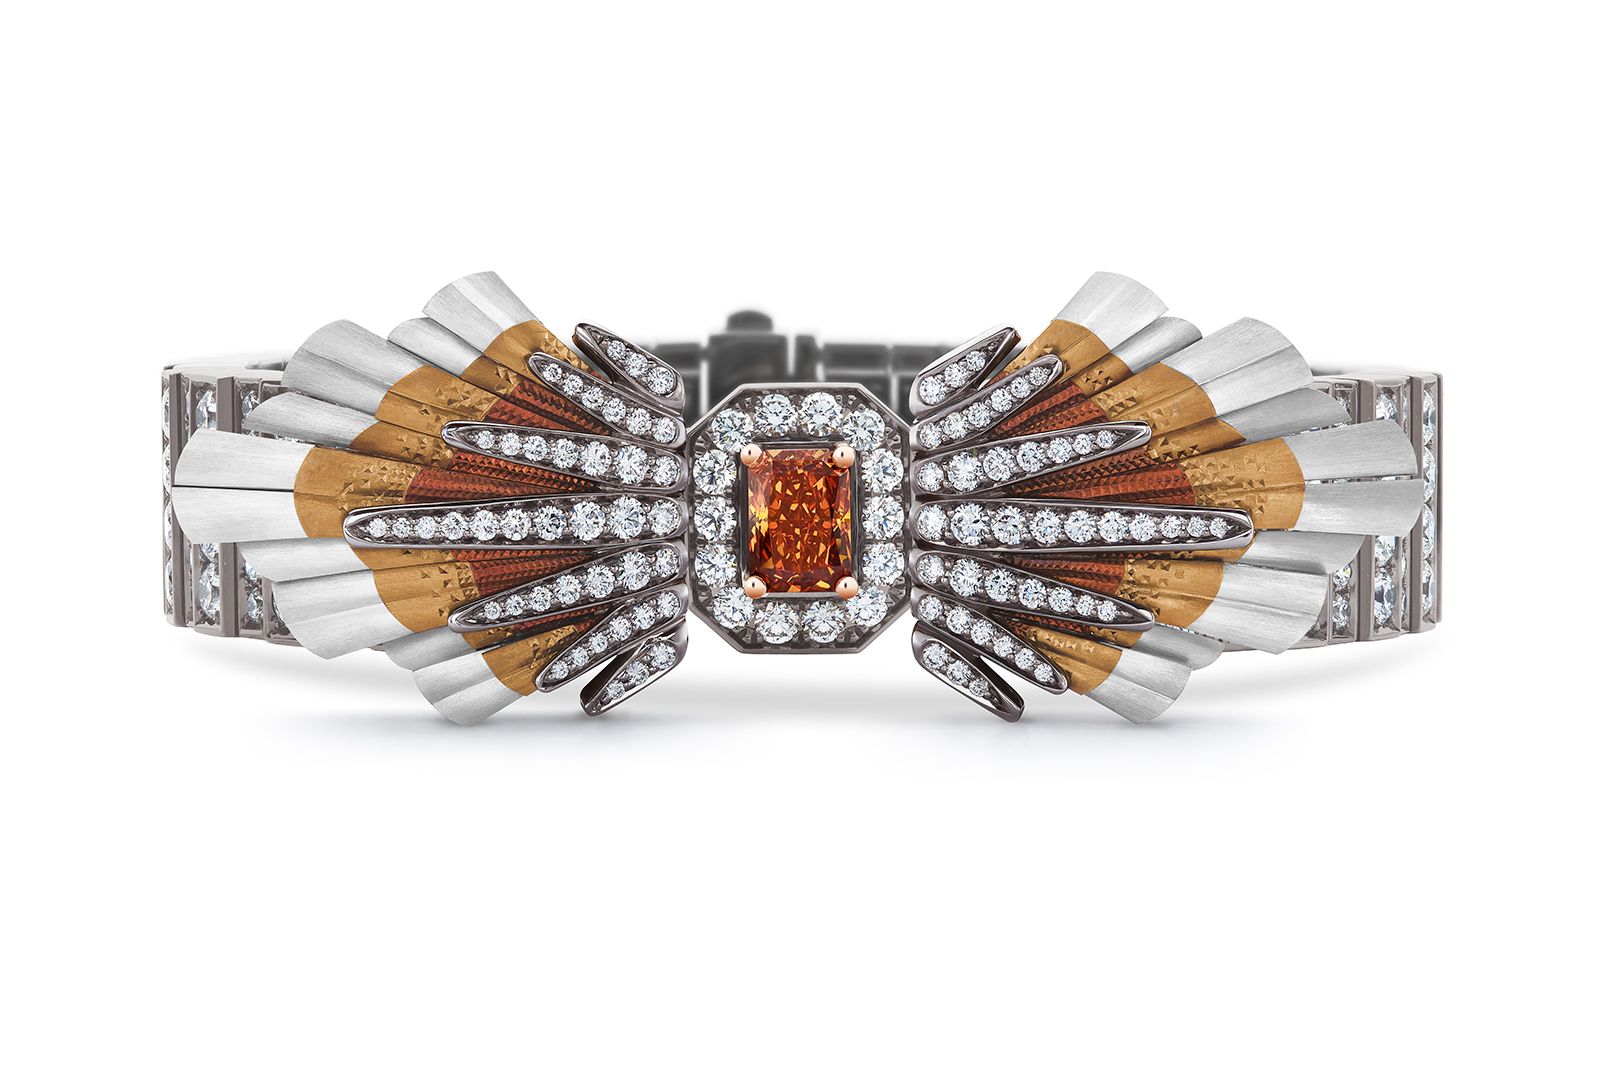 De Beers Jewellers The Alchemist of Light High Jewellery Light Rays bracelet with coloured titanium, white diamonds set against black rhodium-plated gold, and a fancy-coloured diamond centre